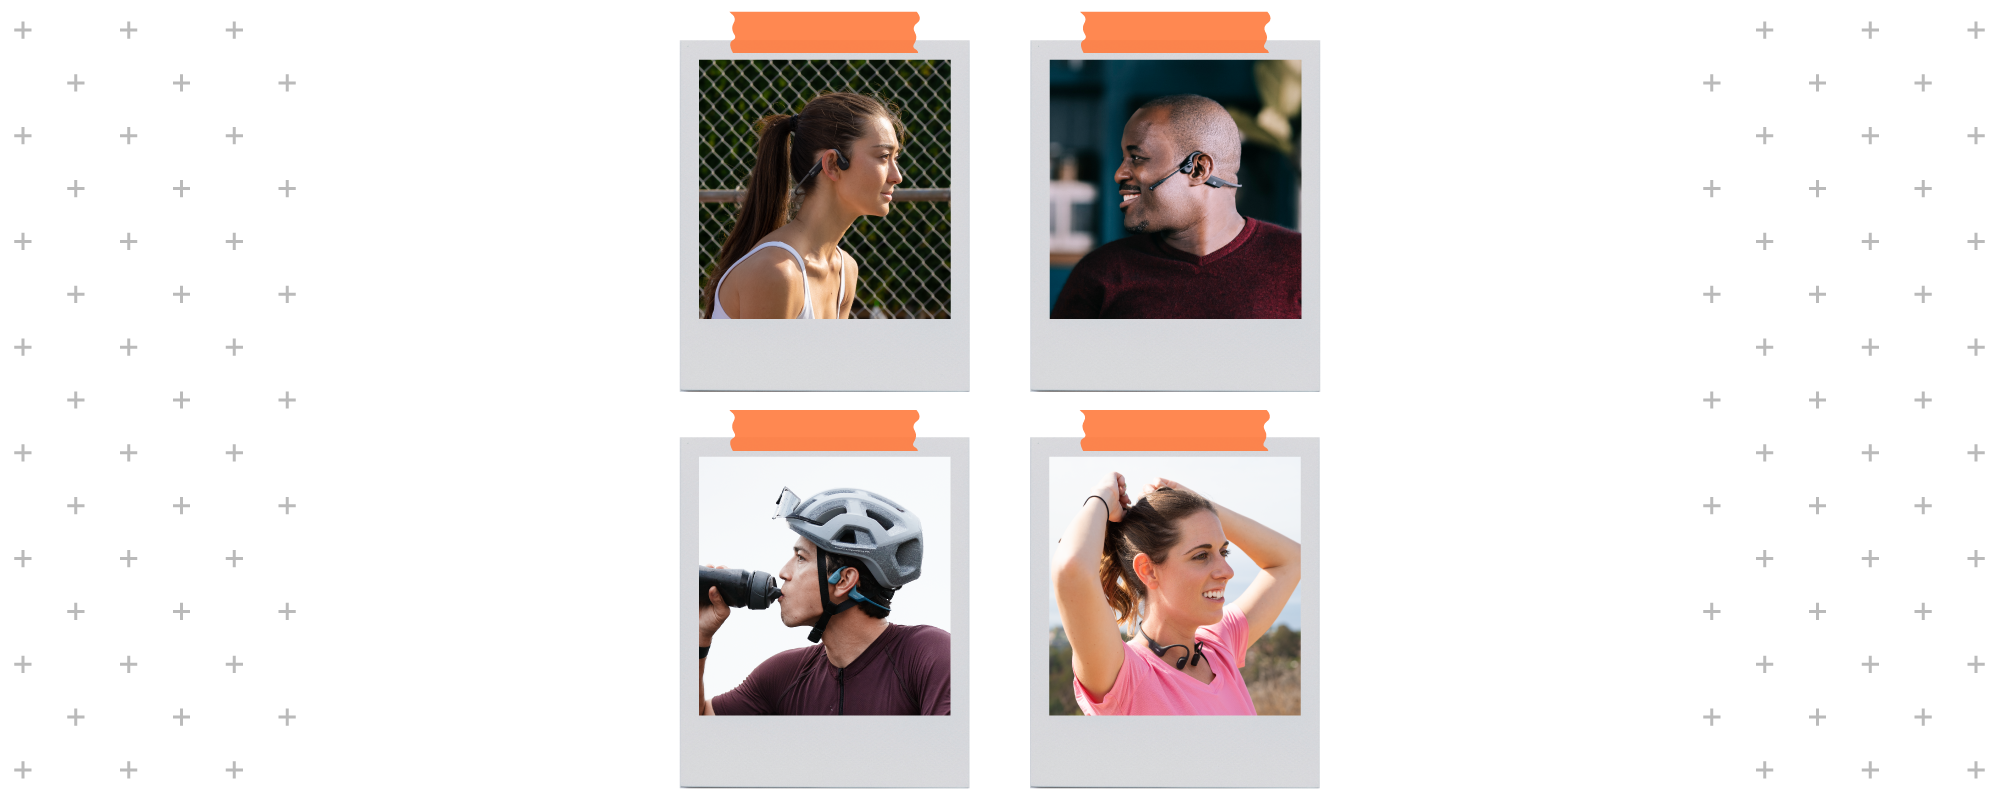 Graphic of four Shokz products. Top row from right to left: OpenMove, OpenComm UC. Bottom row from left to right: OpenRun Pro, OpenRun